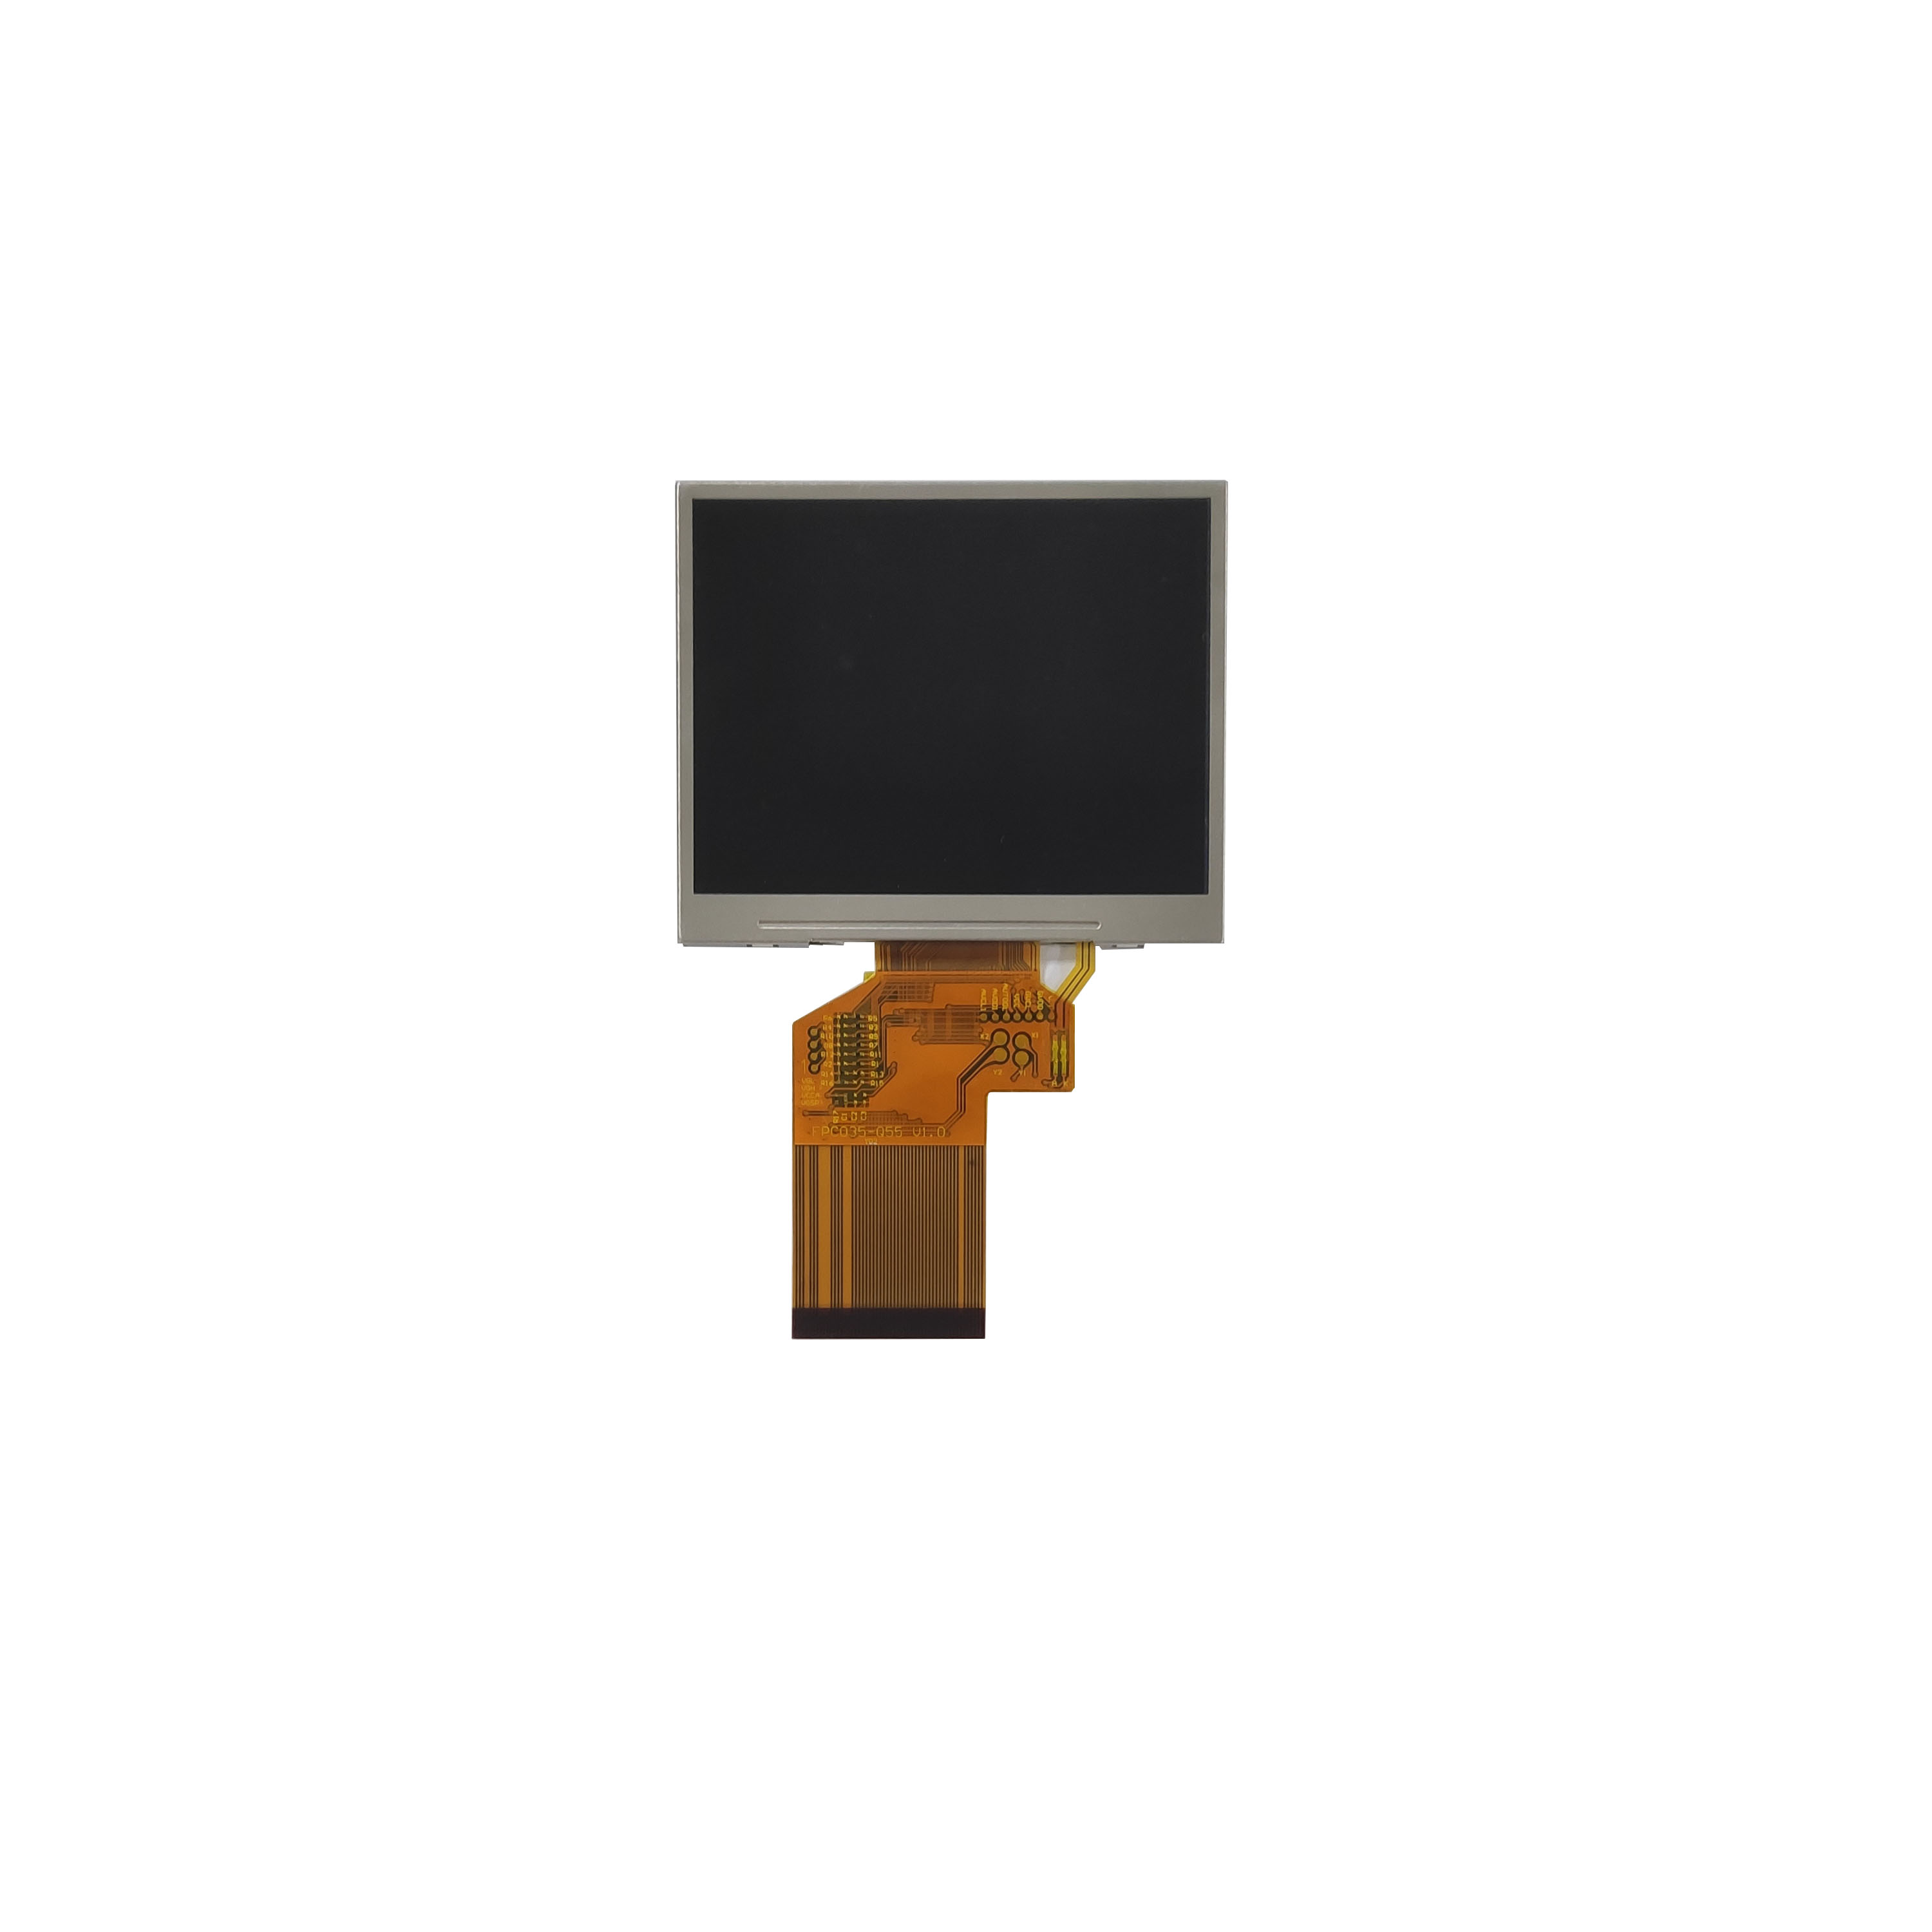 3.5 inch 320*240 IPS TFT LCD display with high brightness 1000nits